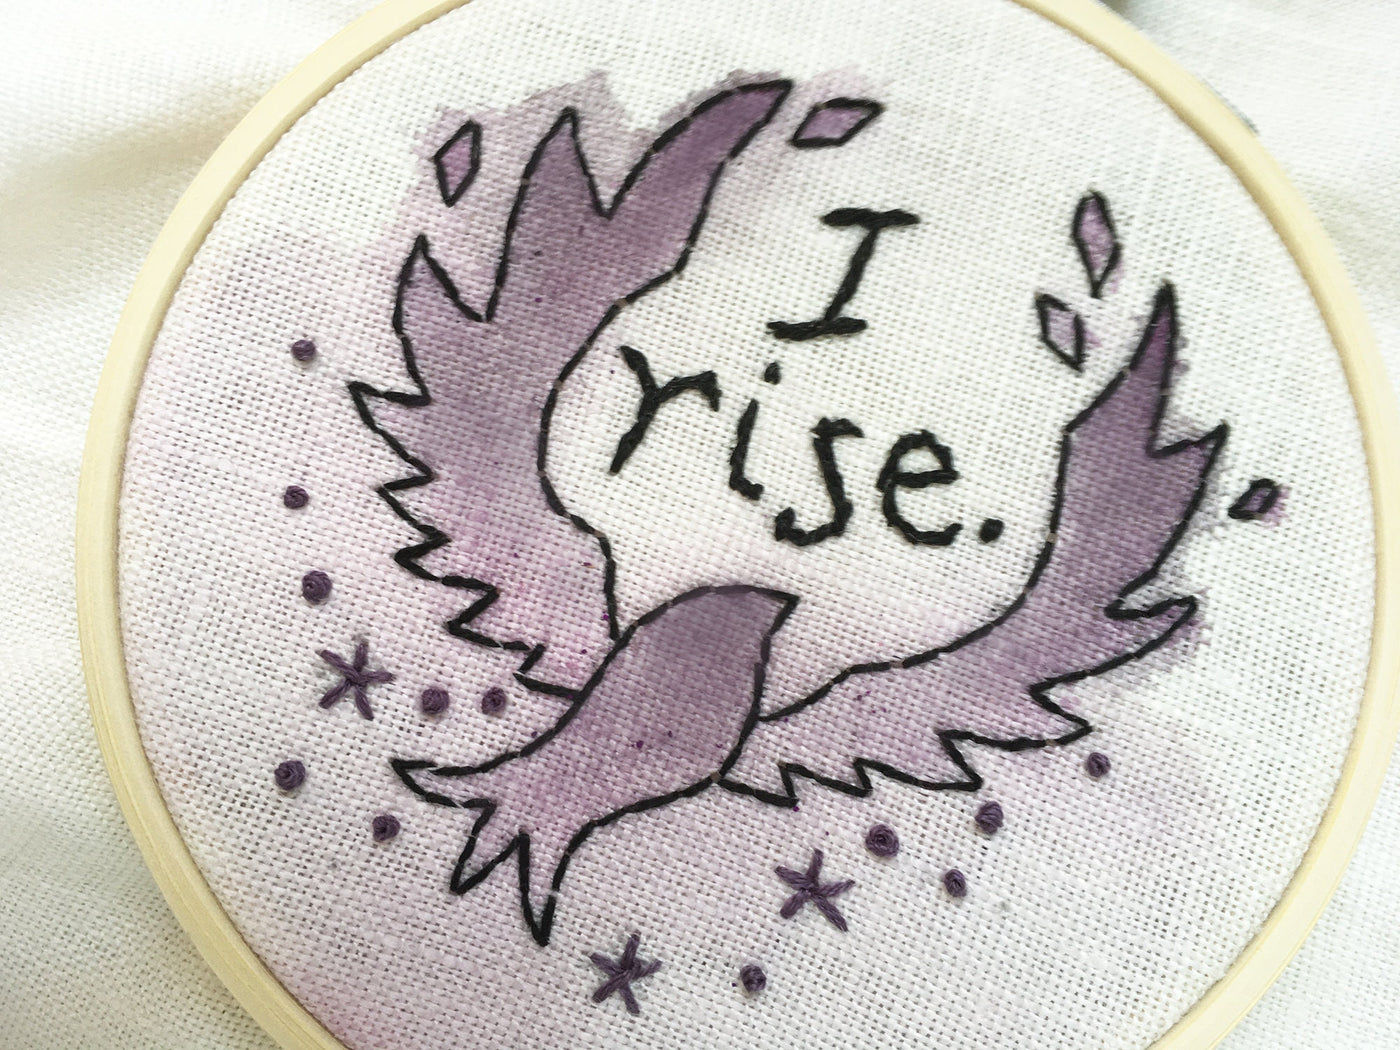 Donation "I rise"  Black Lives Hand Embroidery Pattern